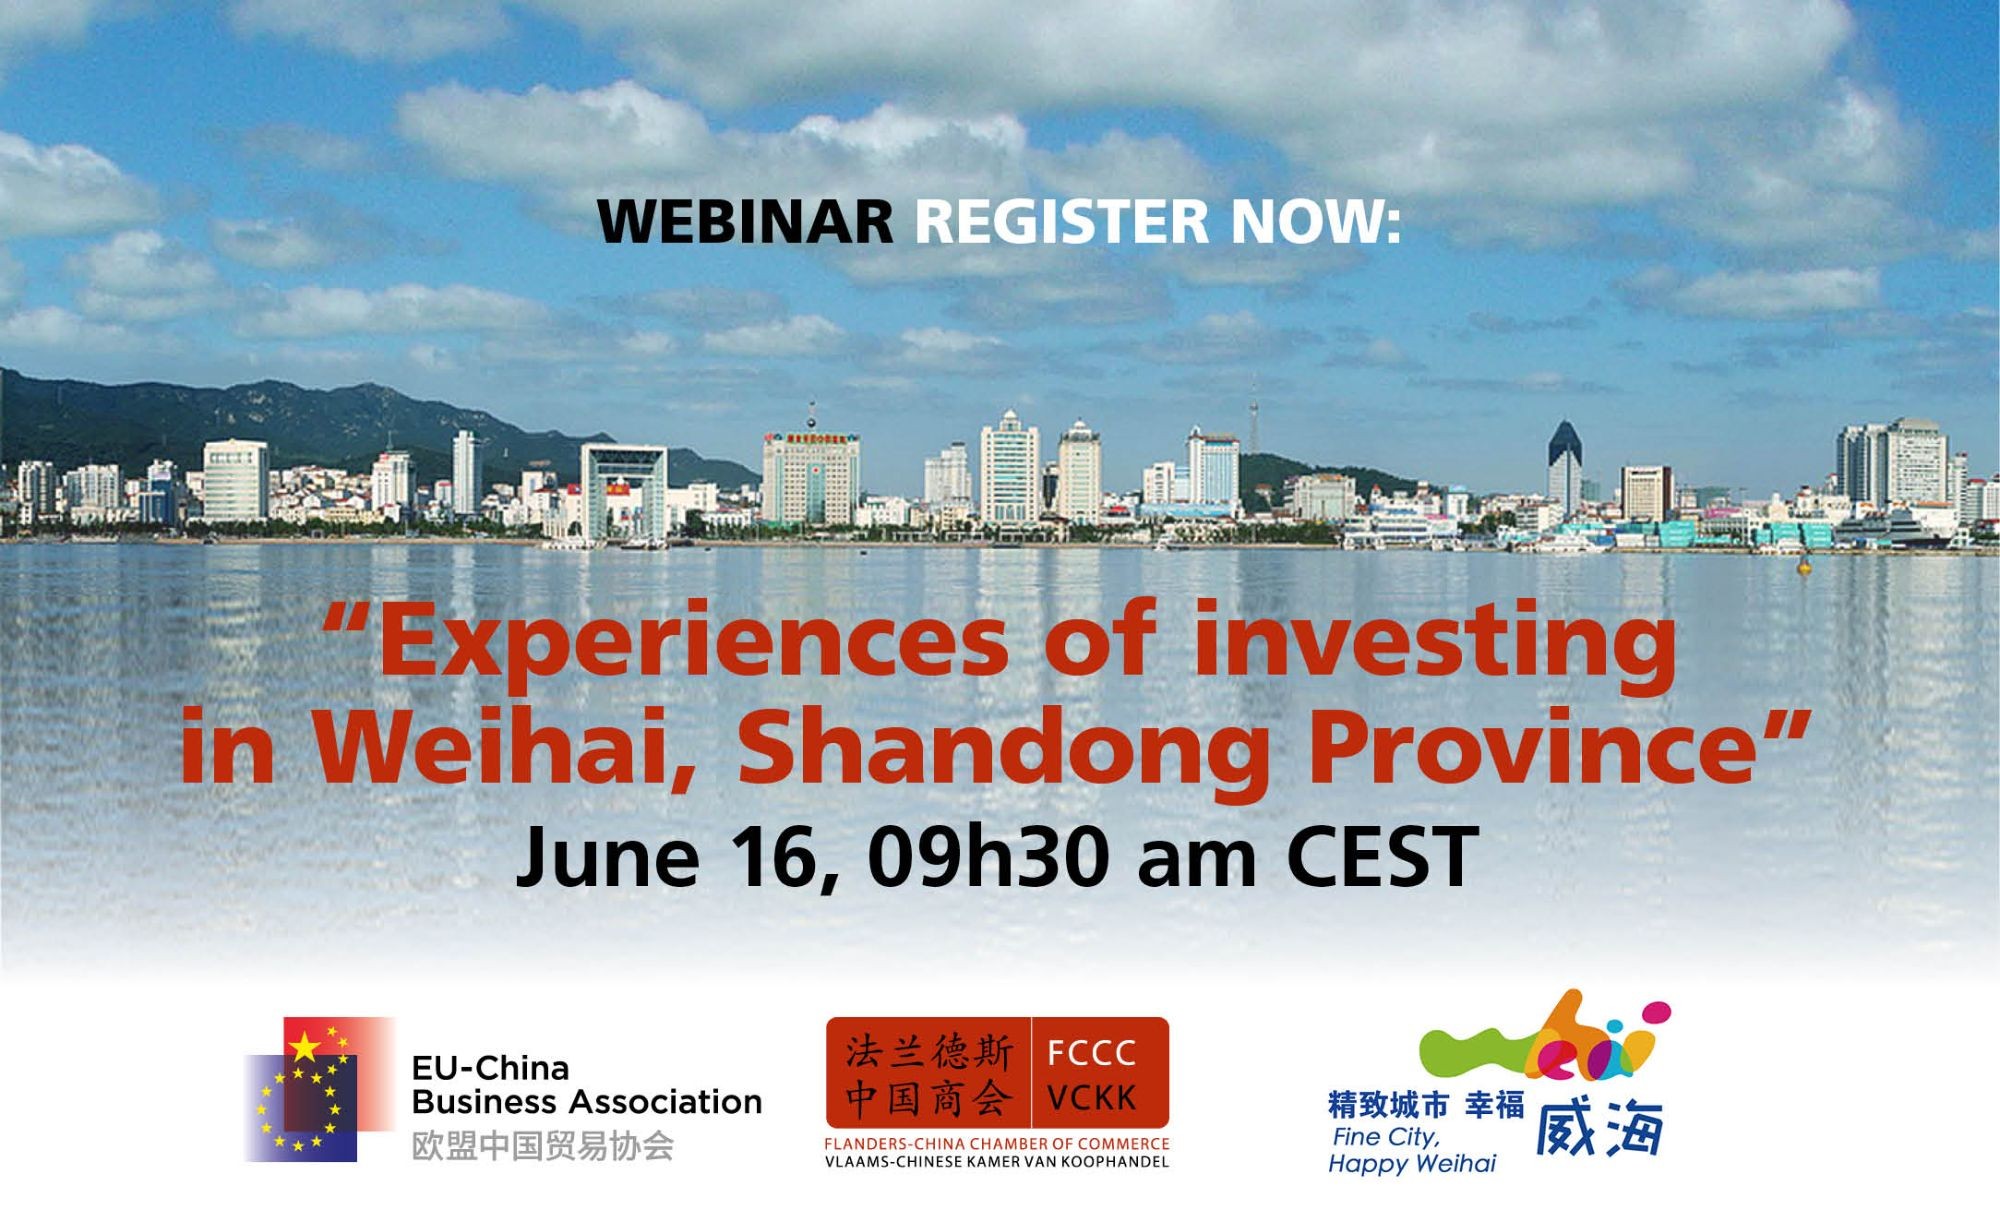 Webinar: Experiences of Investing in Weihai, Shandong Province - 16 June - 09h30 CEST